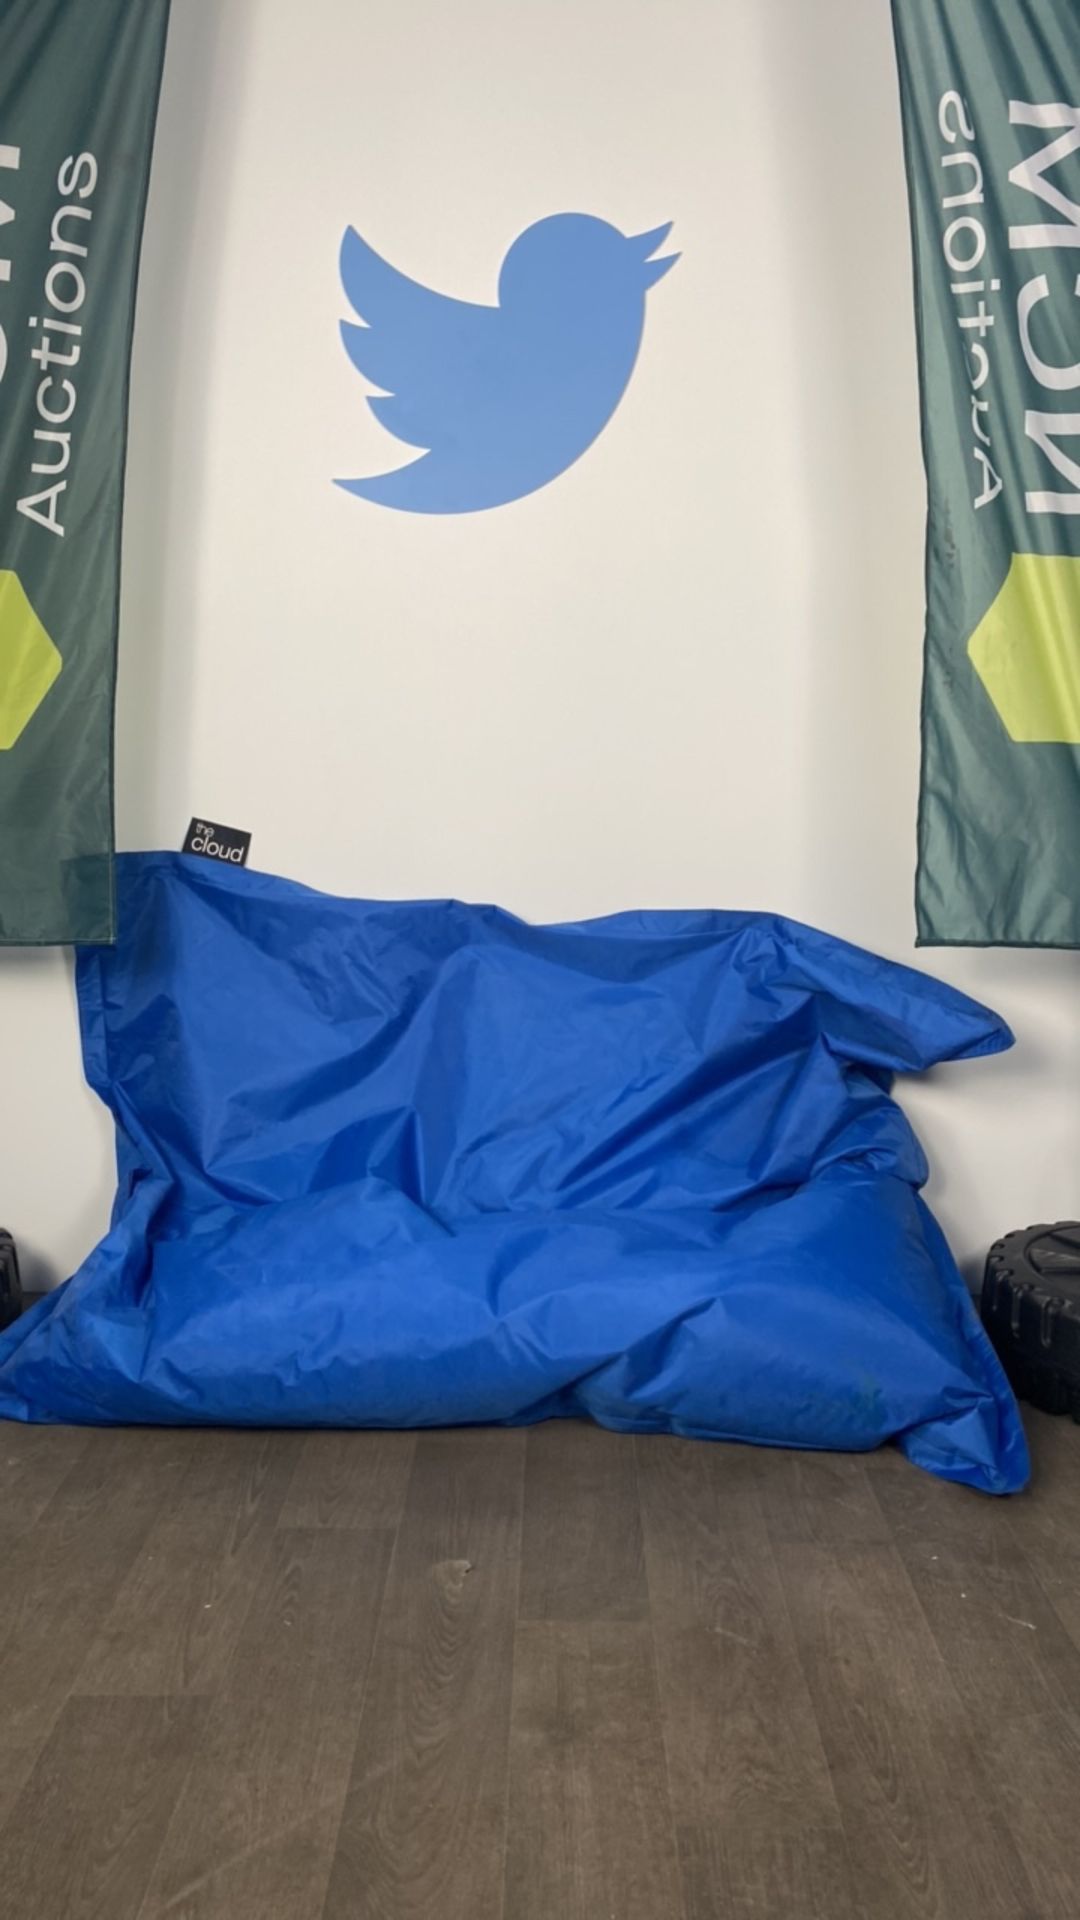 The Cloud Beanbag X5 - Image 6 of 6